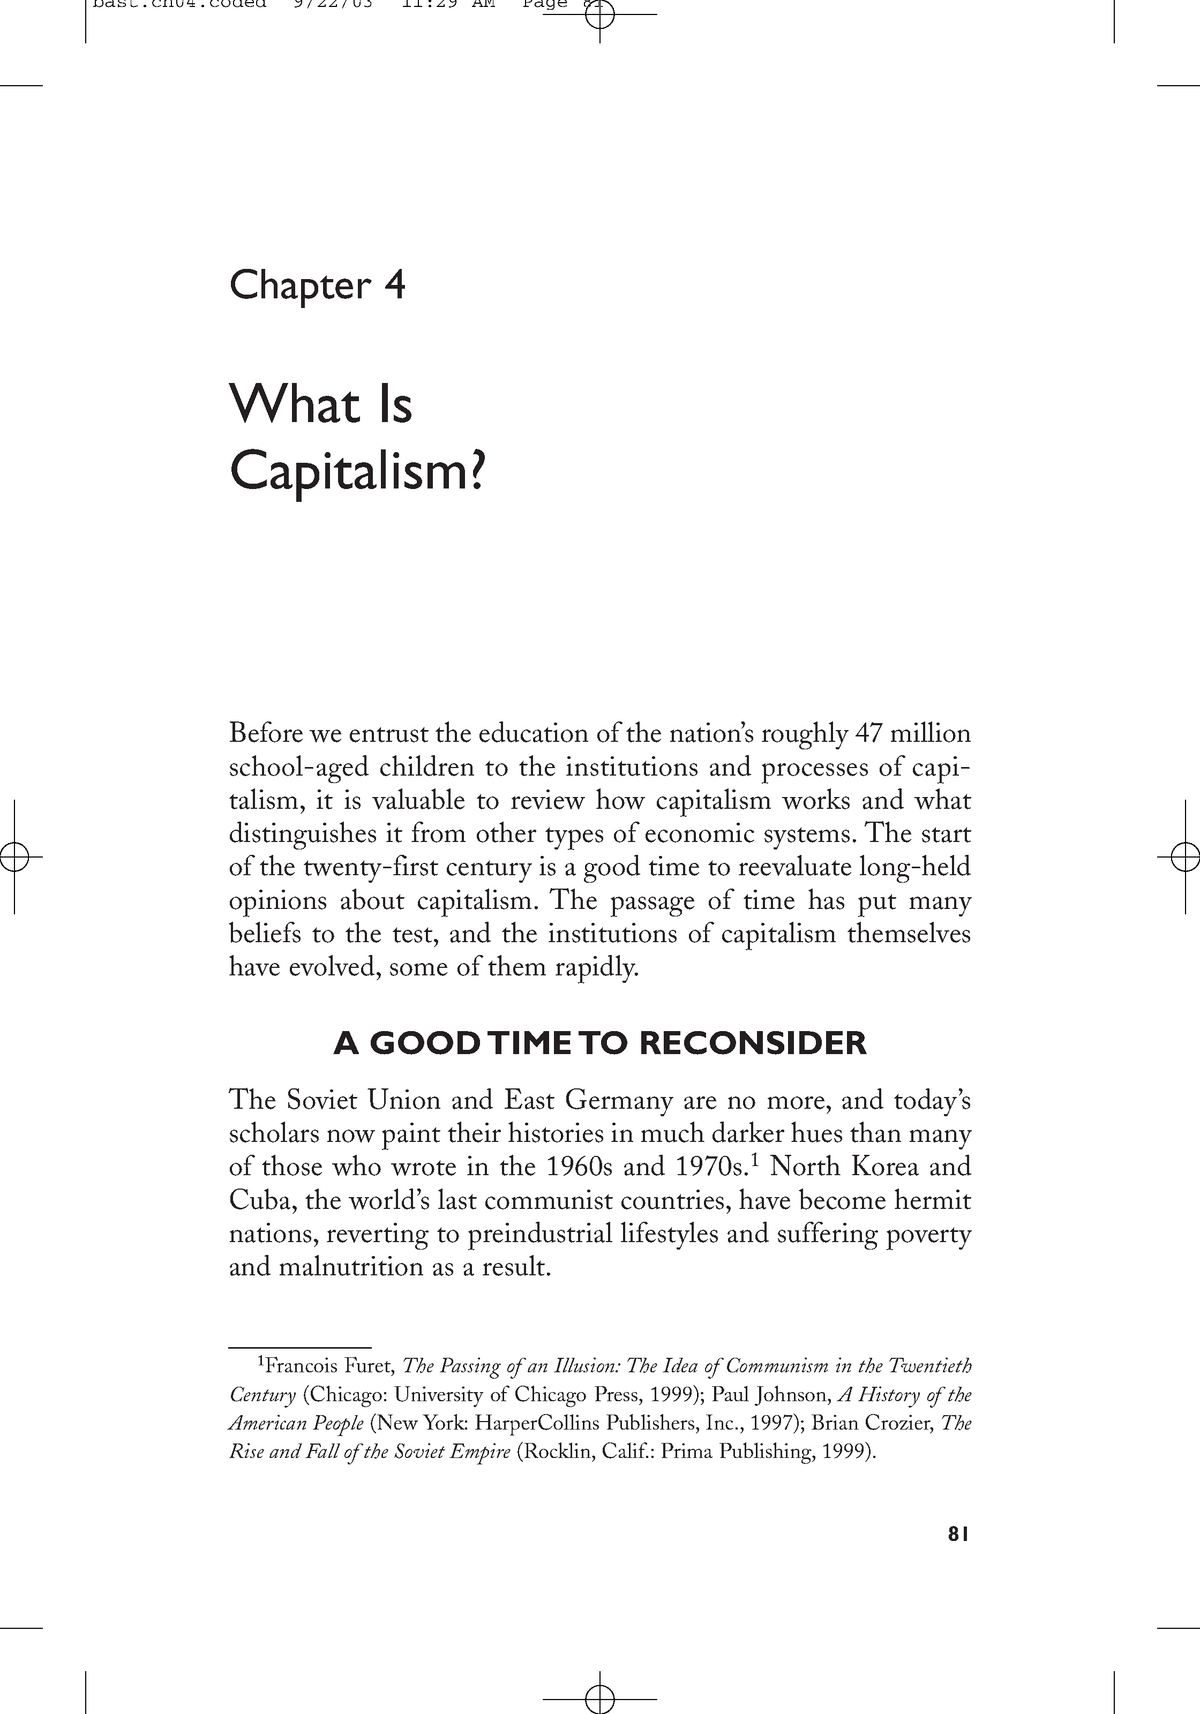 essay about capitalism